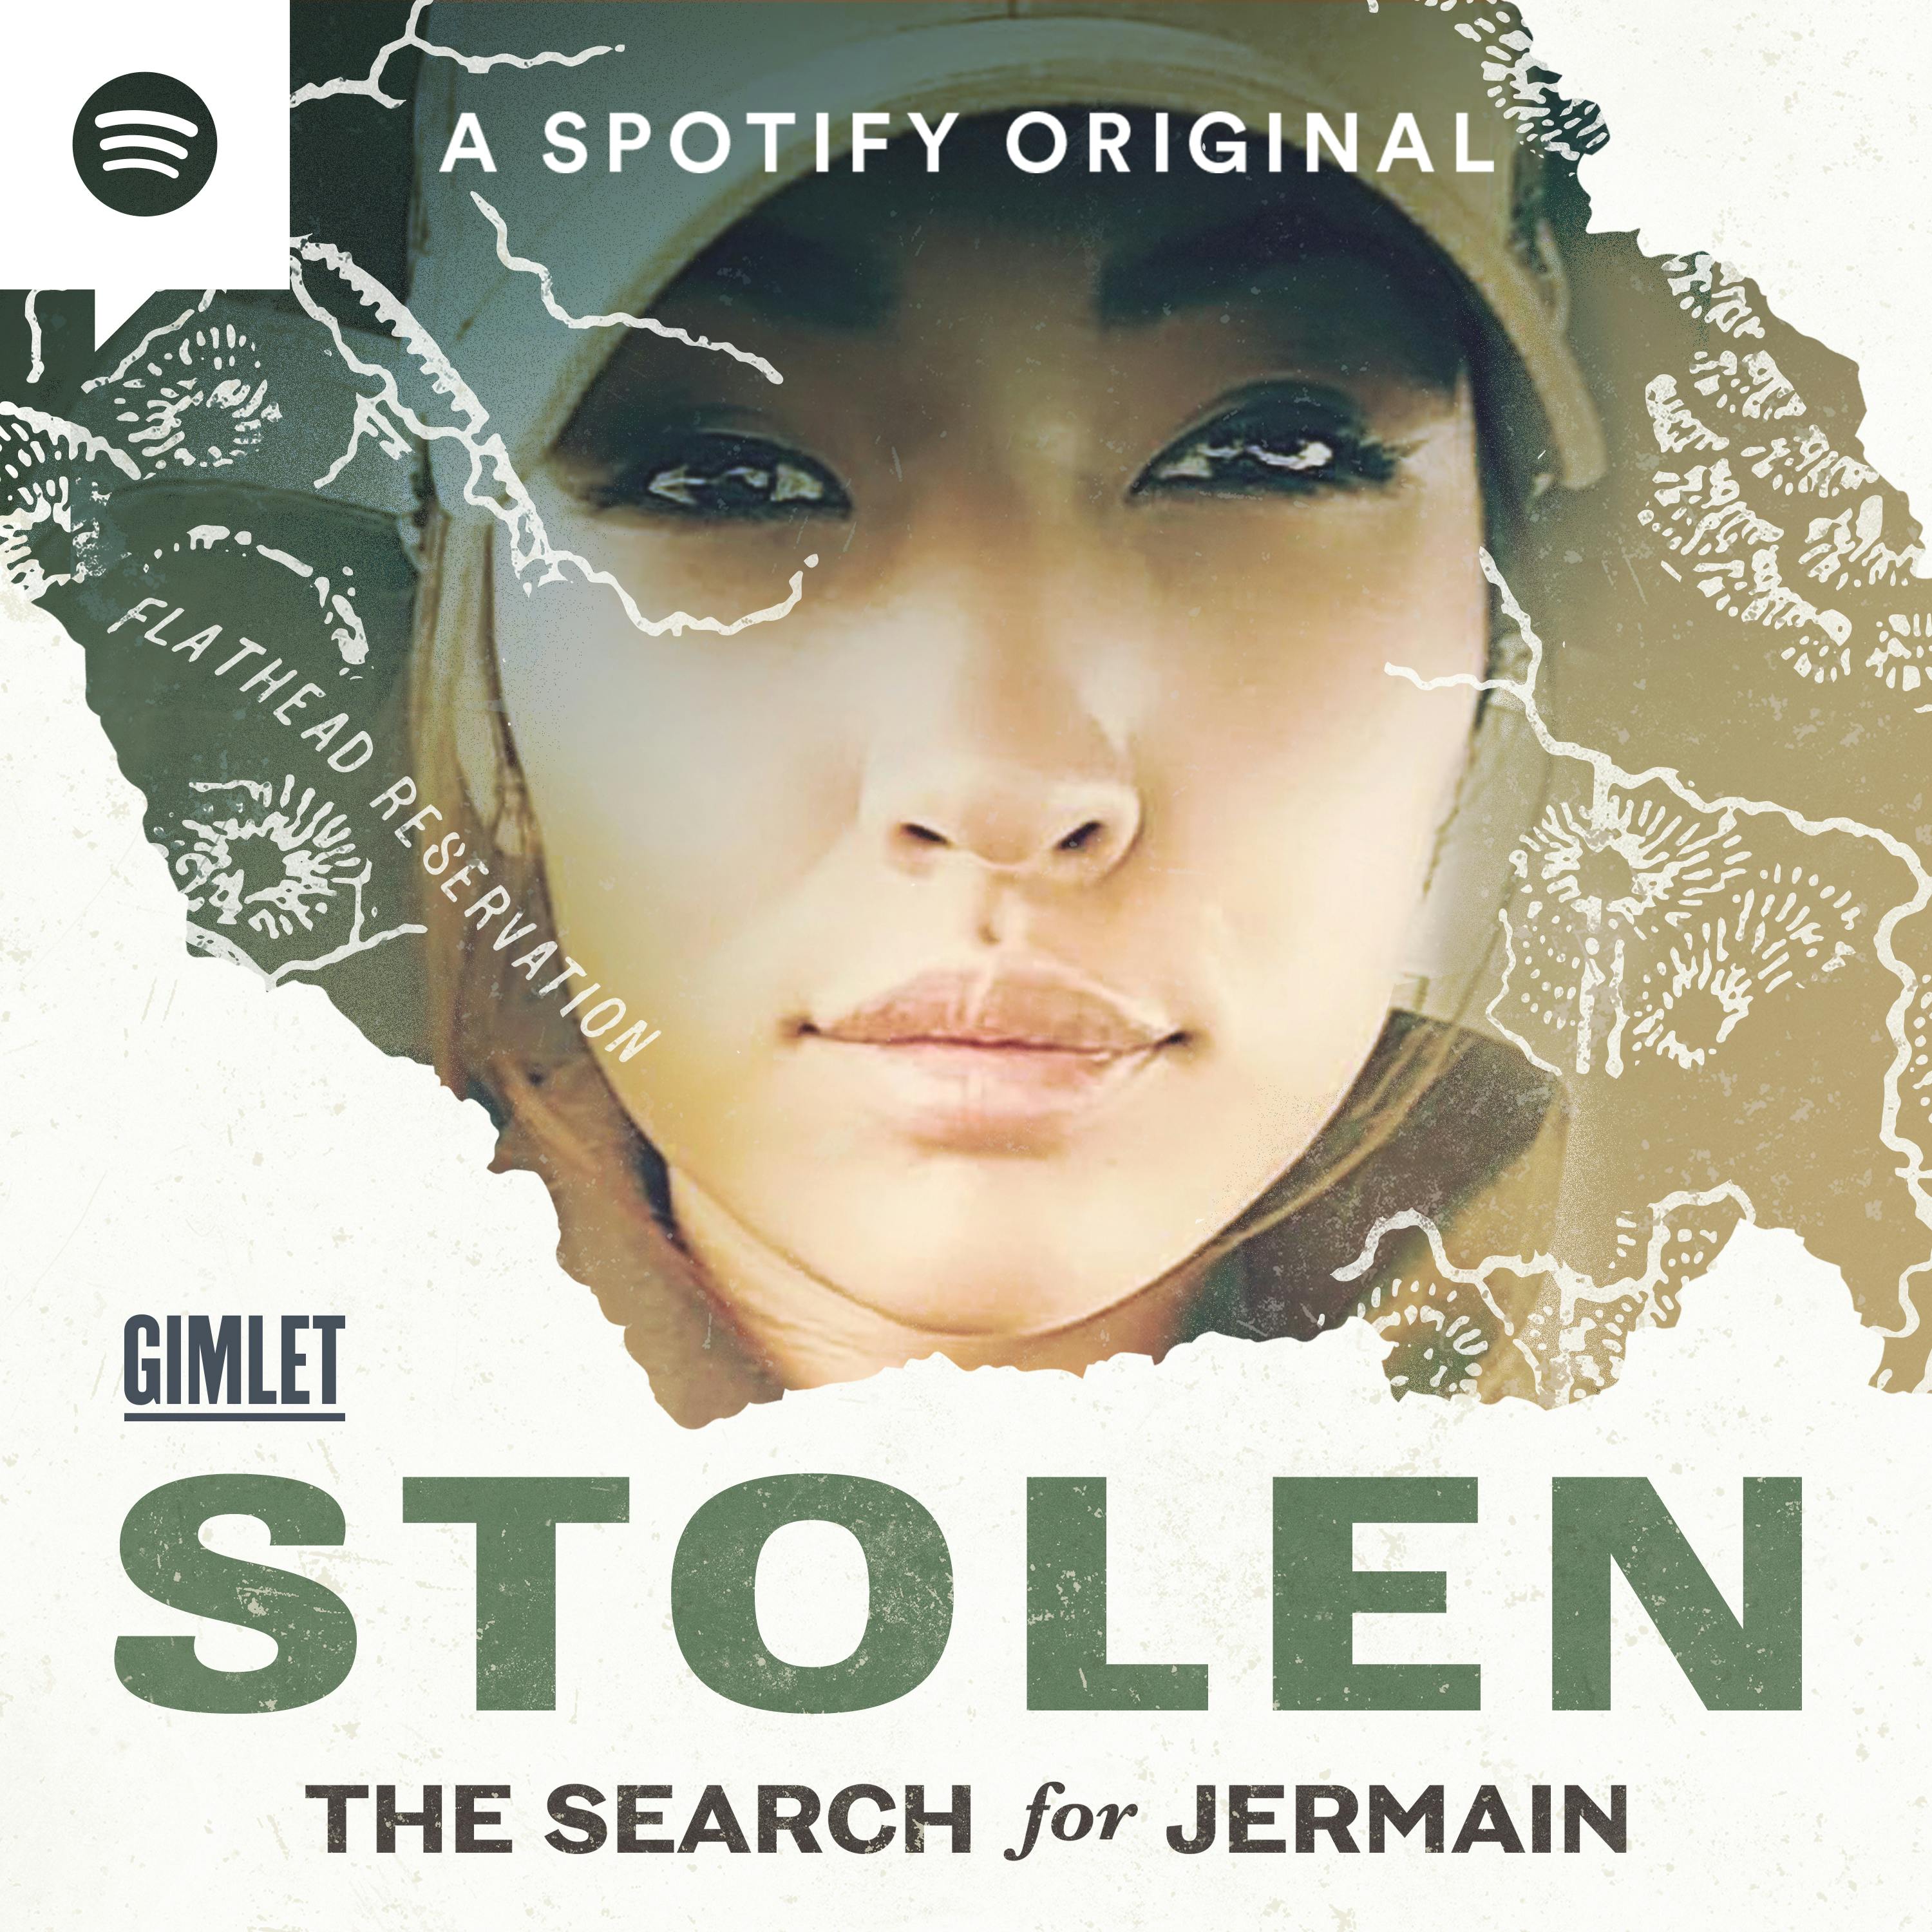 Episode 5: Partner or Family Member (S1 The Search for Jermain)